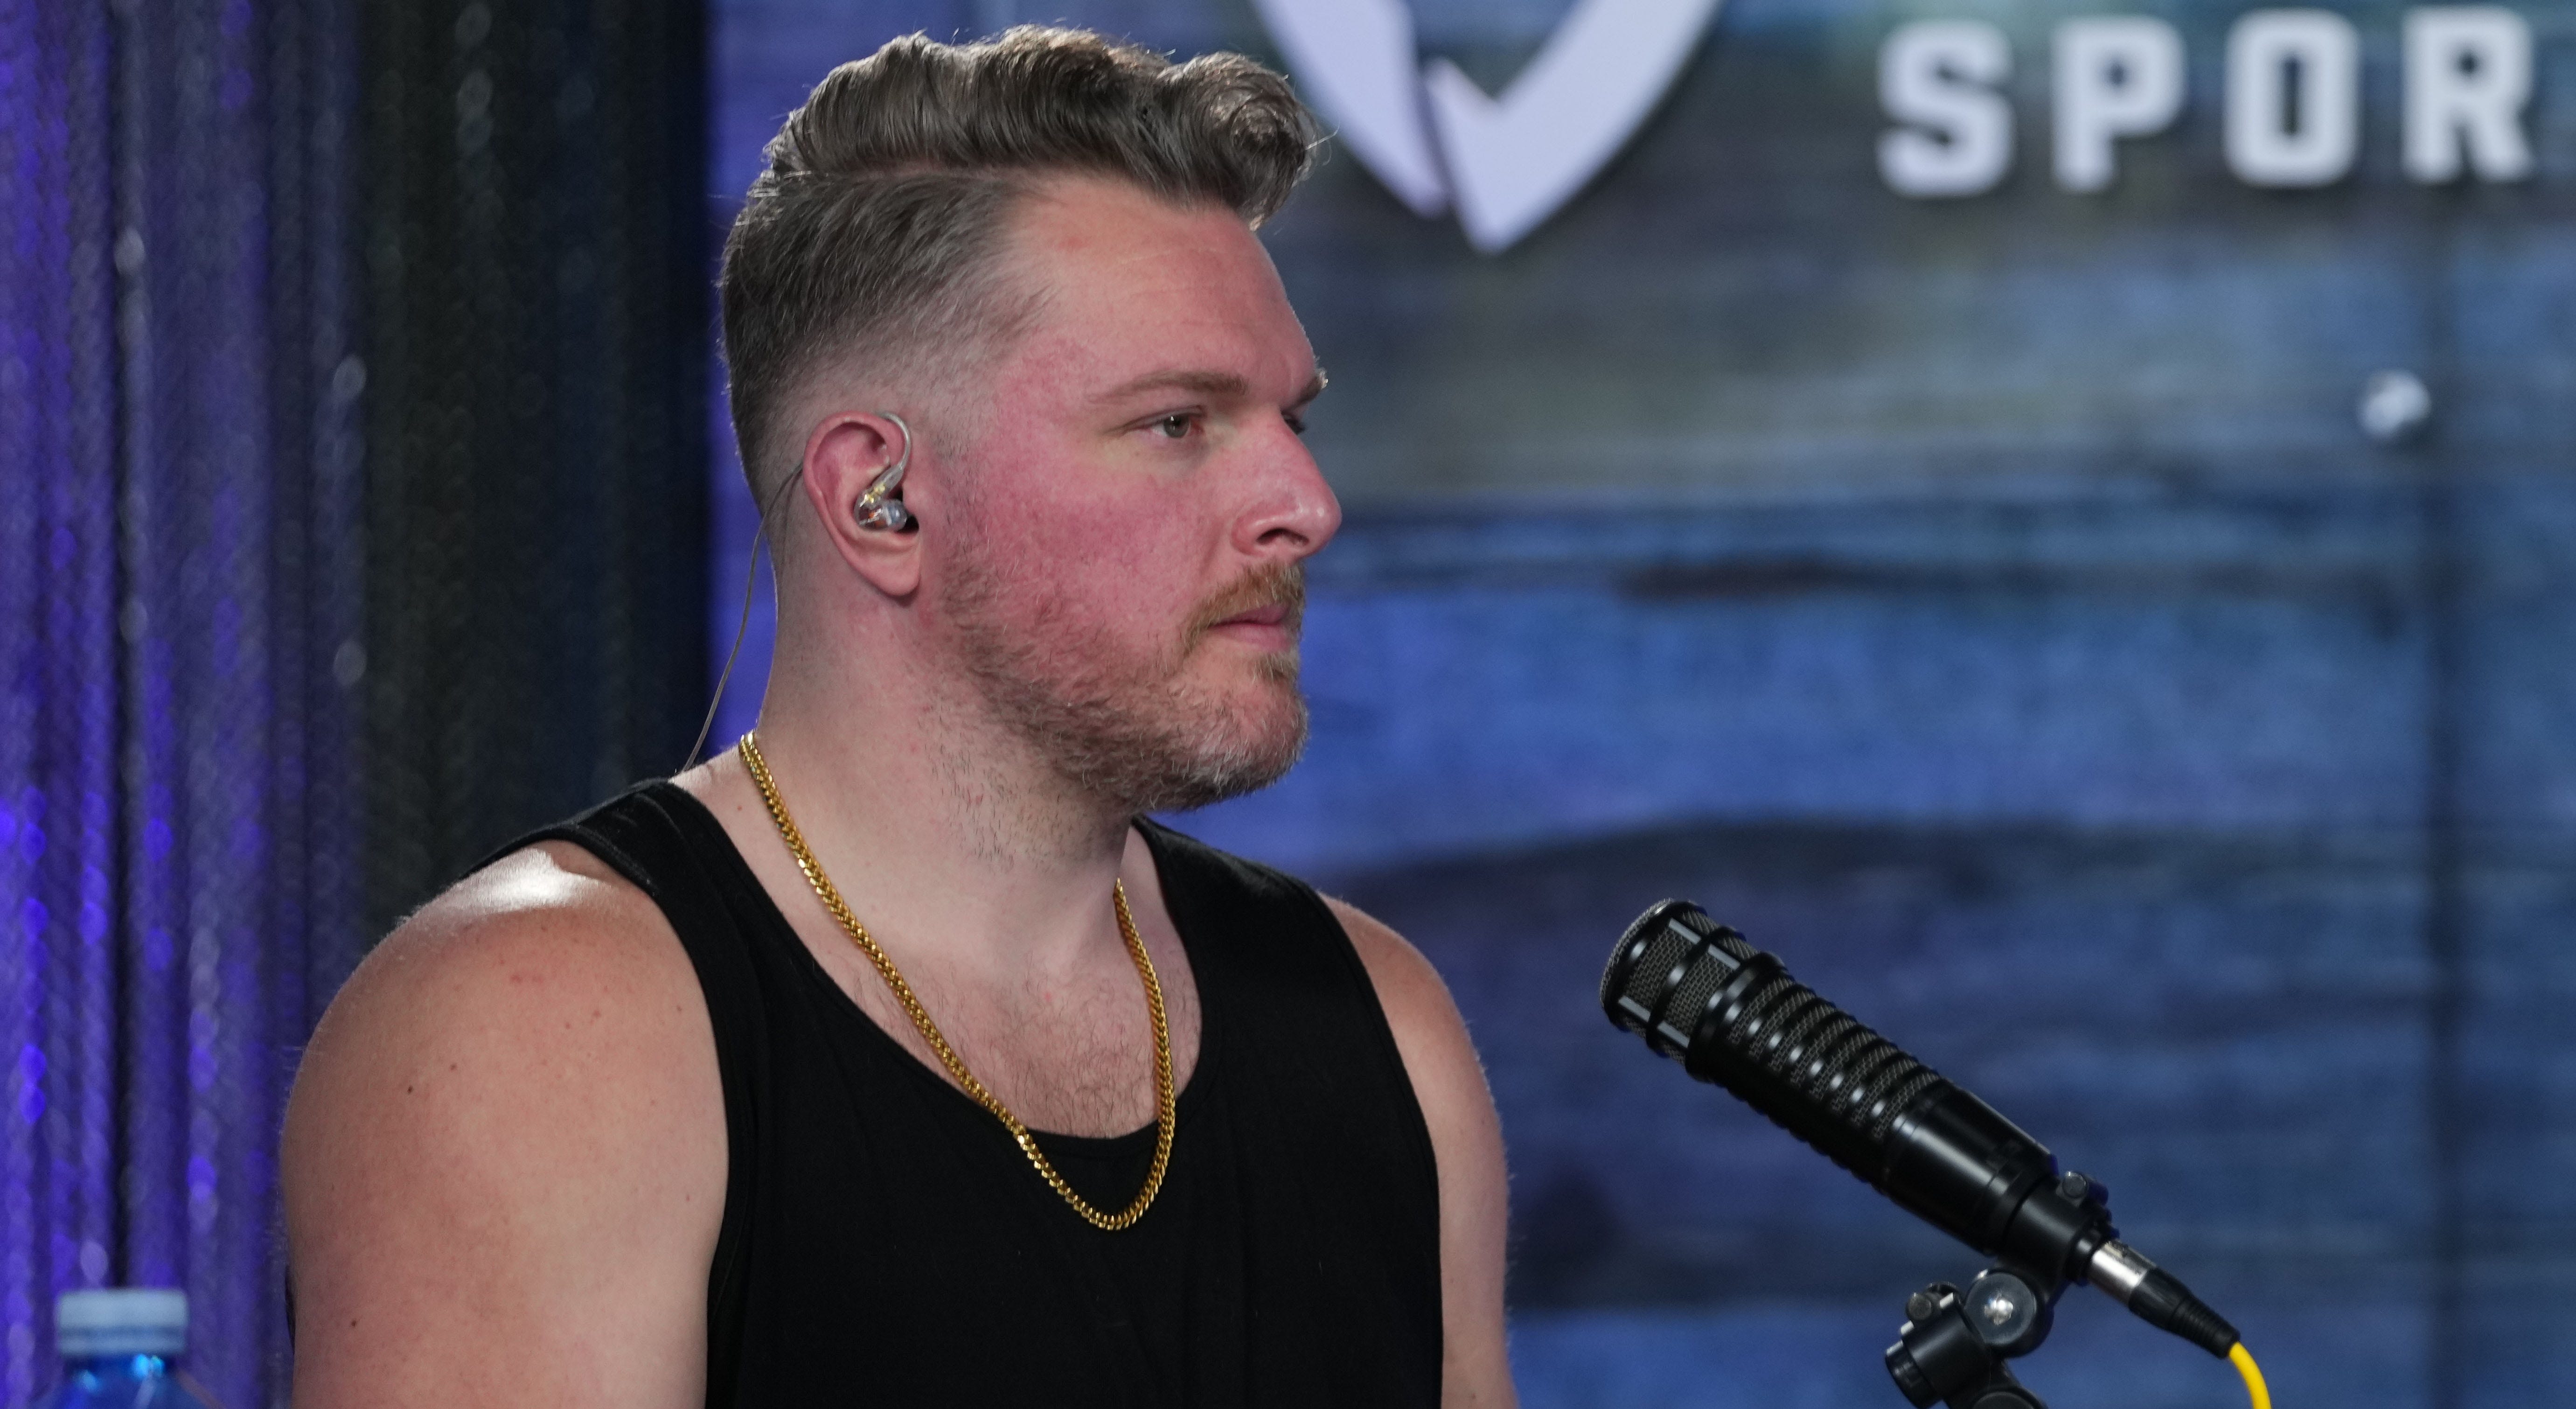 Pat McAfee defends Jeff Saturday hire, eviscerates Joe Thomas and others for being TV ‘puppets’